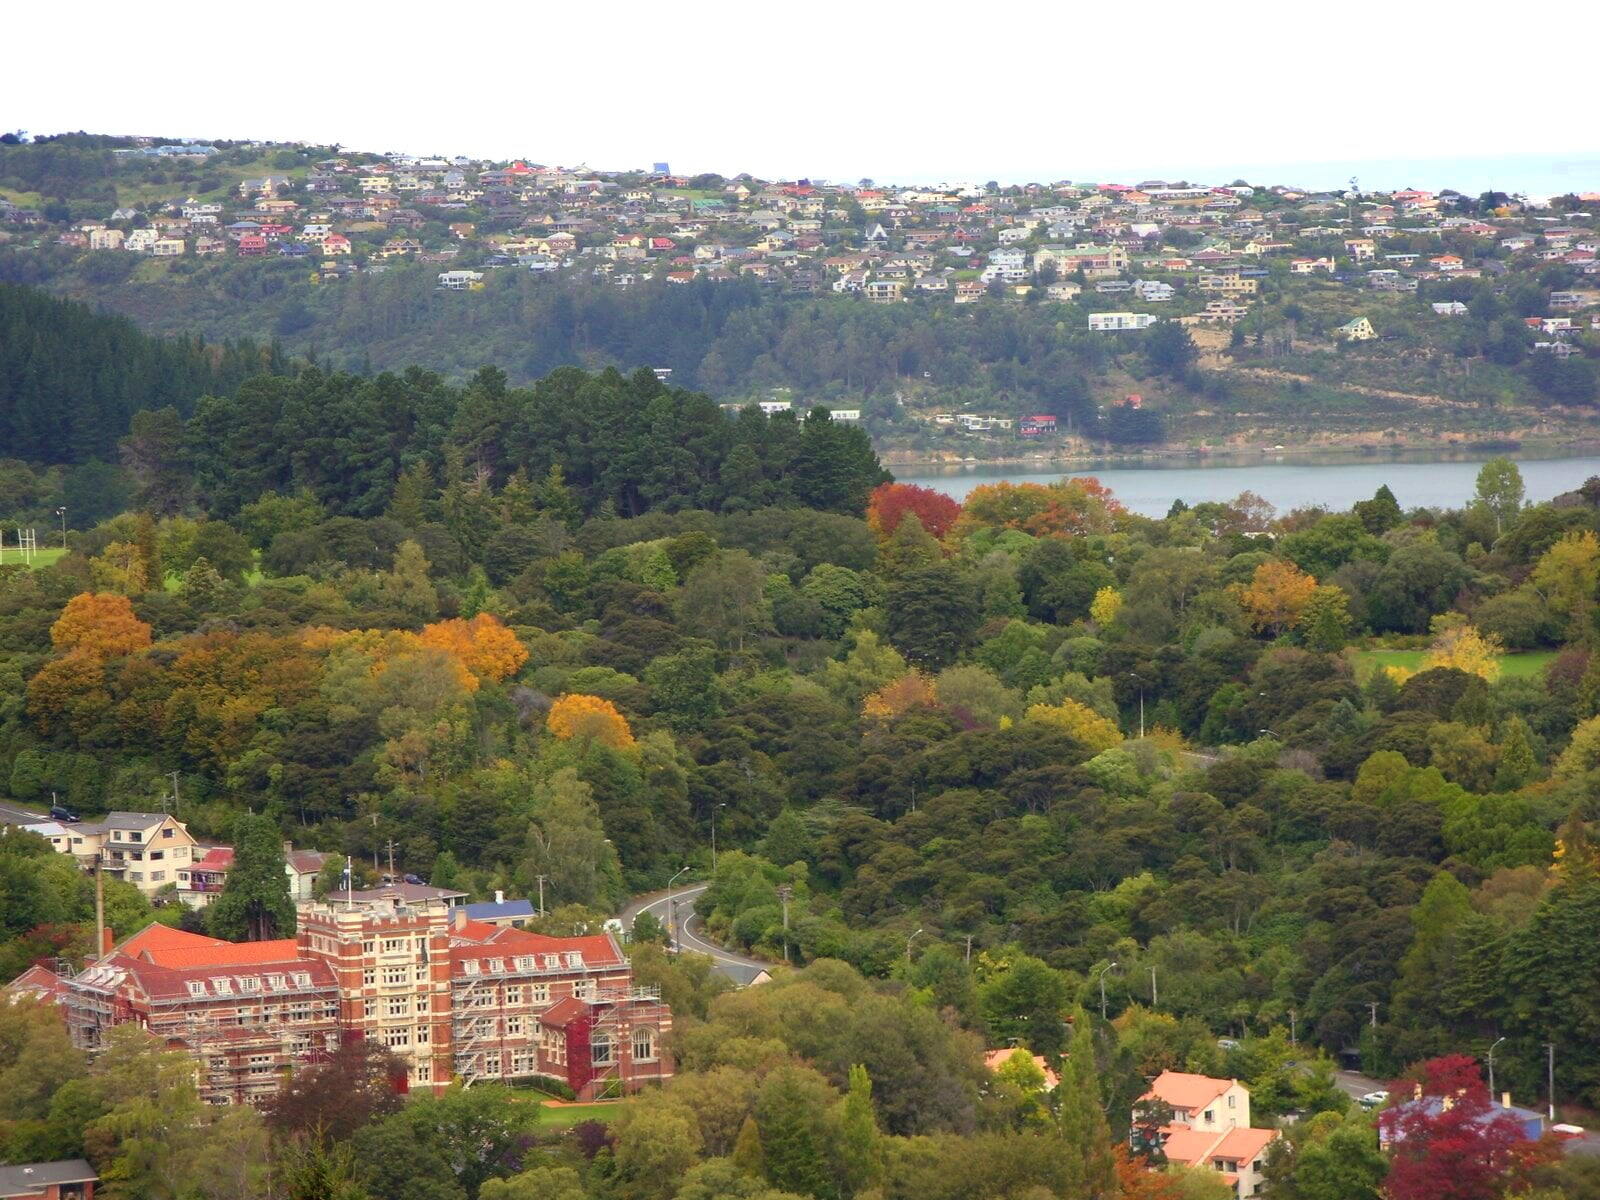 Dunedin - The Knox facade and Botanic Gardens on the South, with the Otago Peninsula and a sliver of harbour on the far side of the hill.